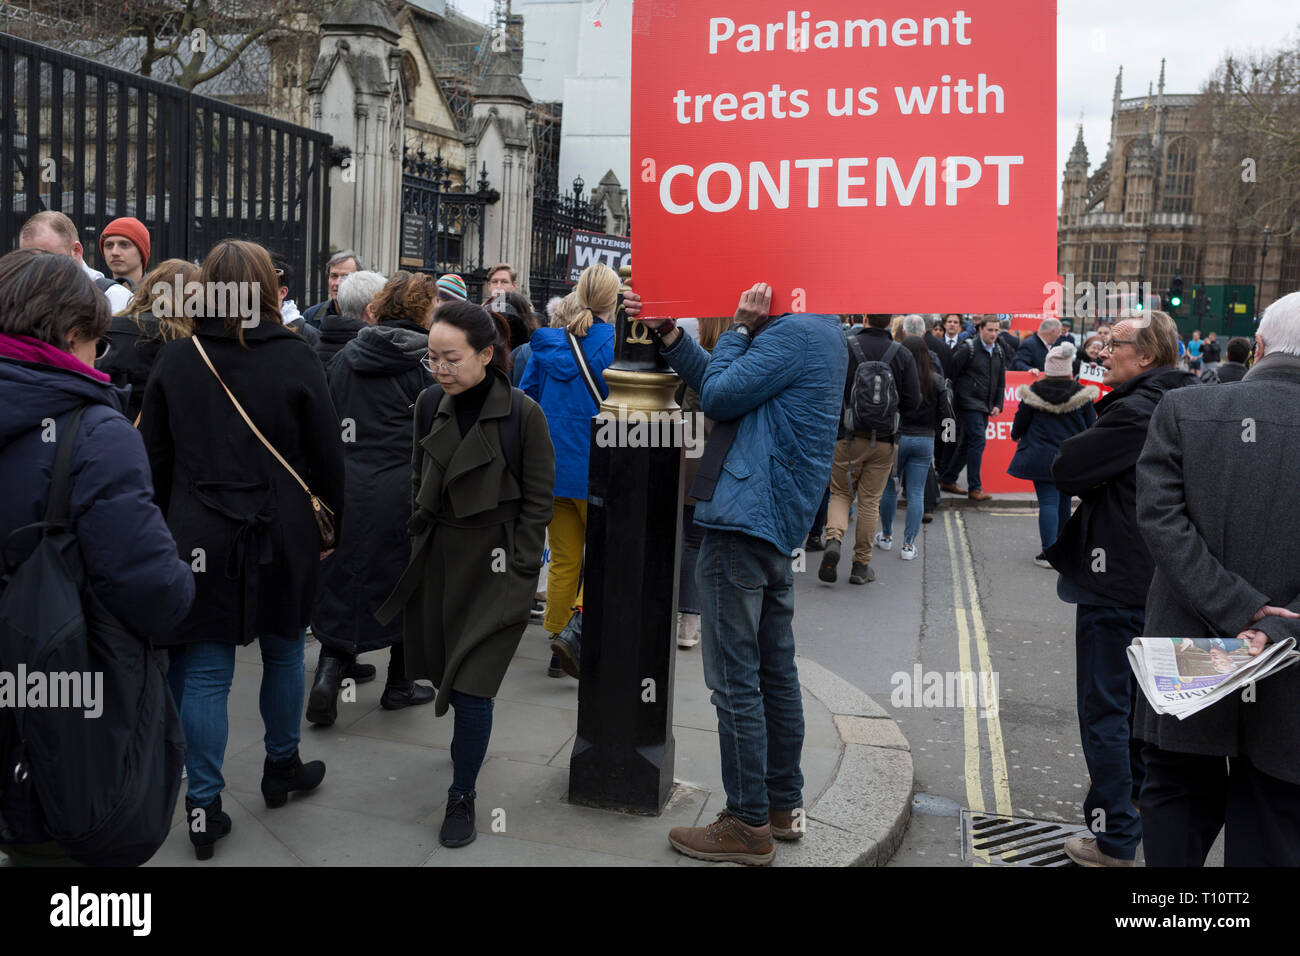 A day after Commons Speaker John Bercow announced his refusal to accept Prime Minster Theresa May's third Brexit Meaningful Vote, a Brexiteer holds a sign about parliament's contemptuous treatment of its people, on 19th March 2019, in London, England. Stock Photo